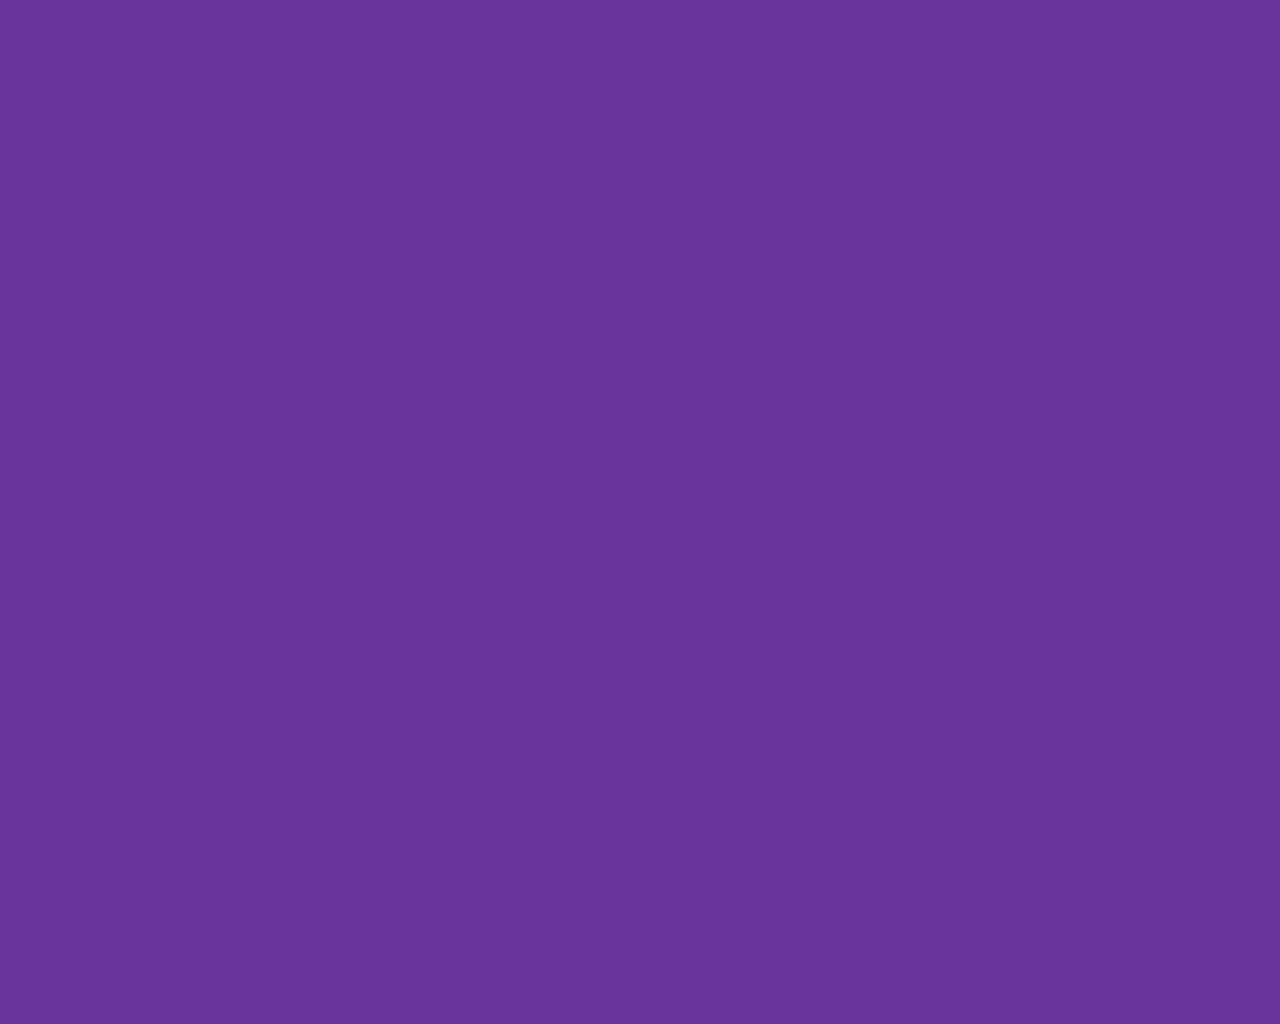 1280x1024 Purple Heart Solid Color Background